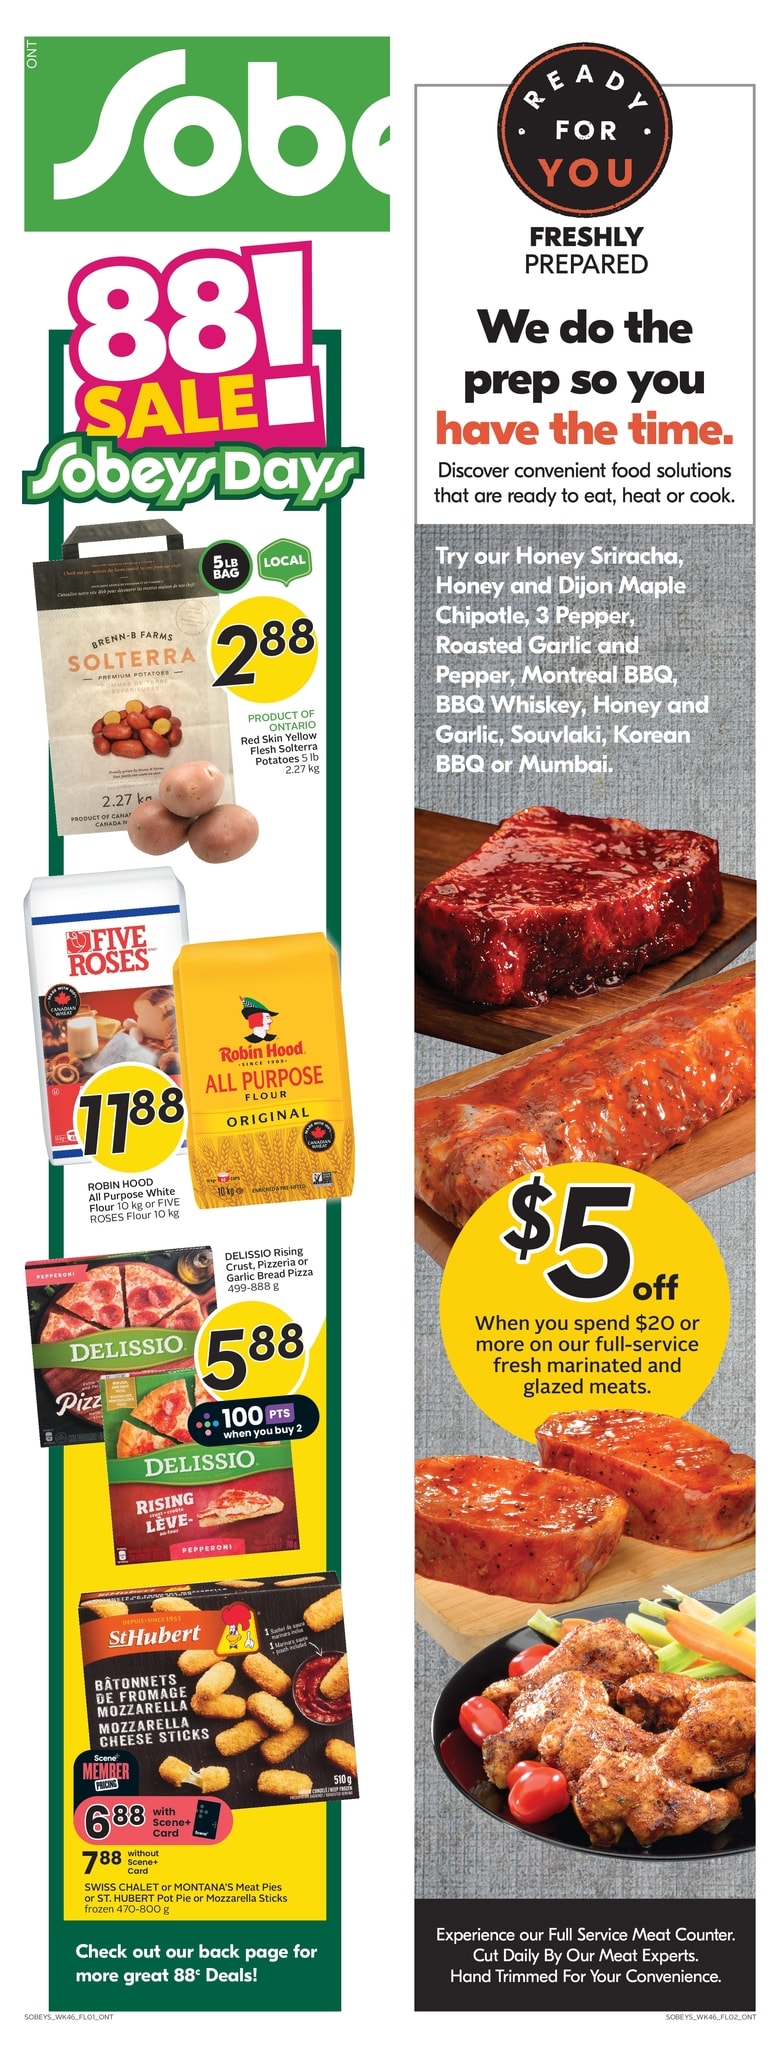 Sobeys - Weekly Flyer Specials - Page 2